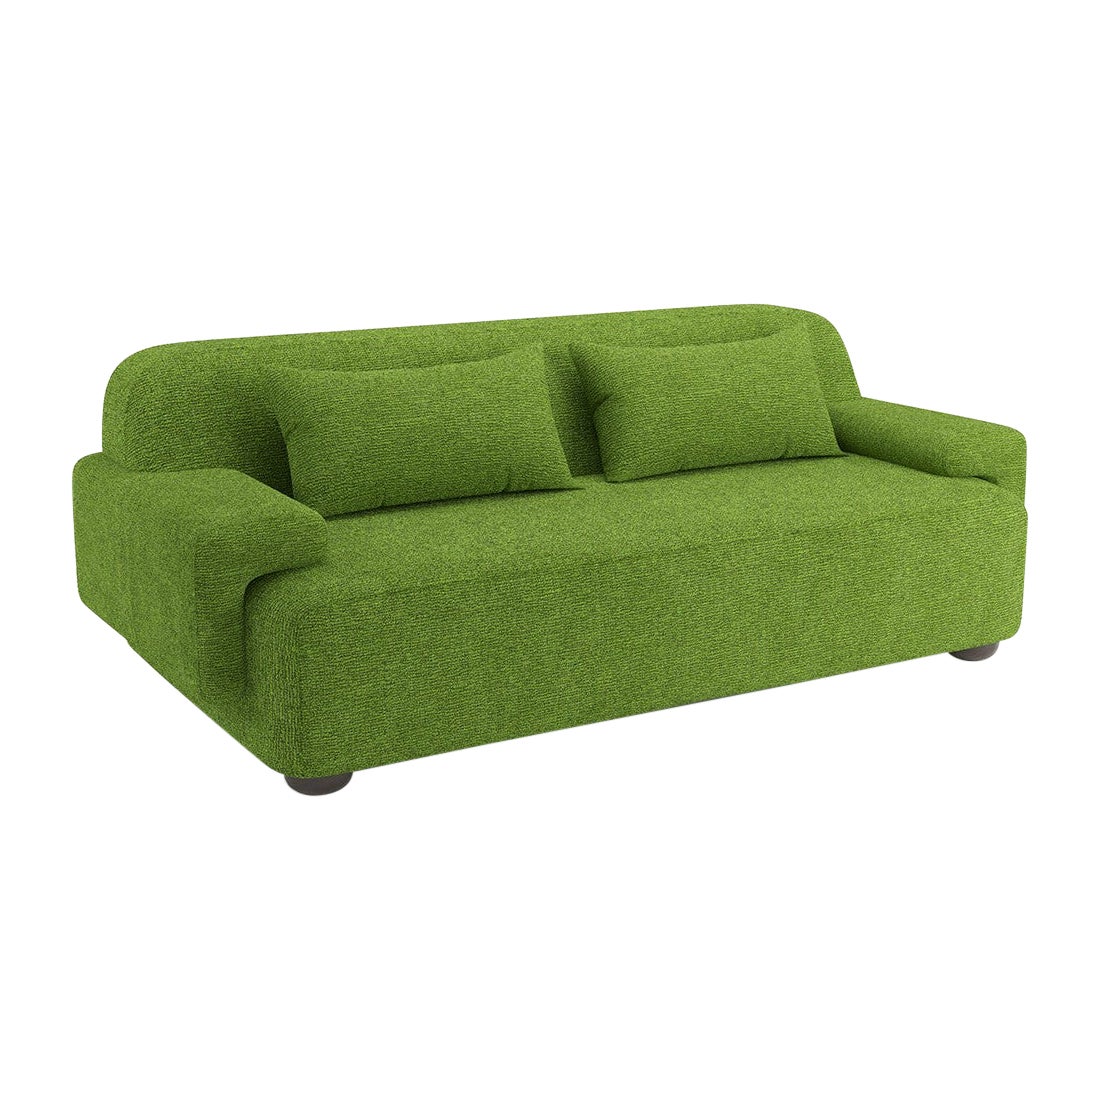 Popus Editions Lena 3 Seater Sofa in Grass Megeve Fabric with Knit Effect For Sale